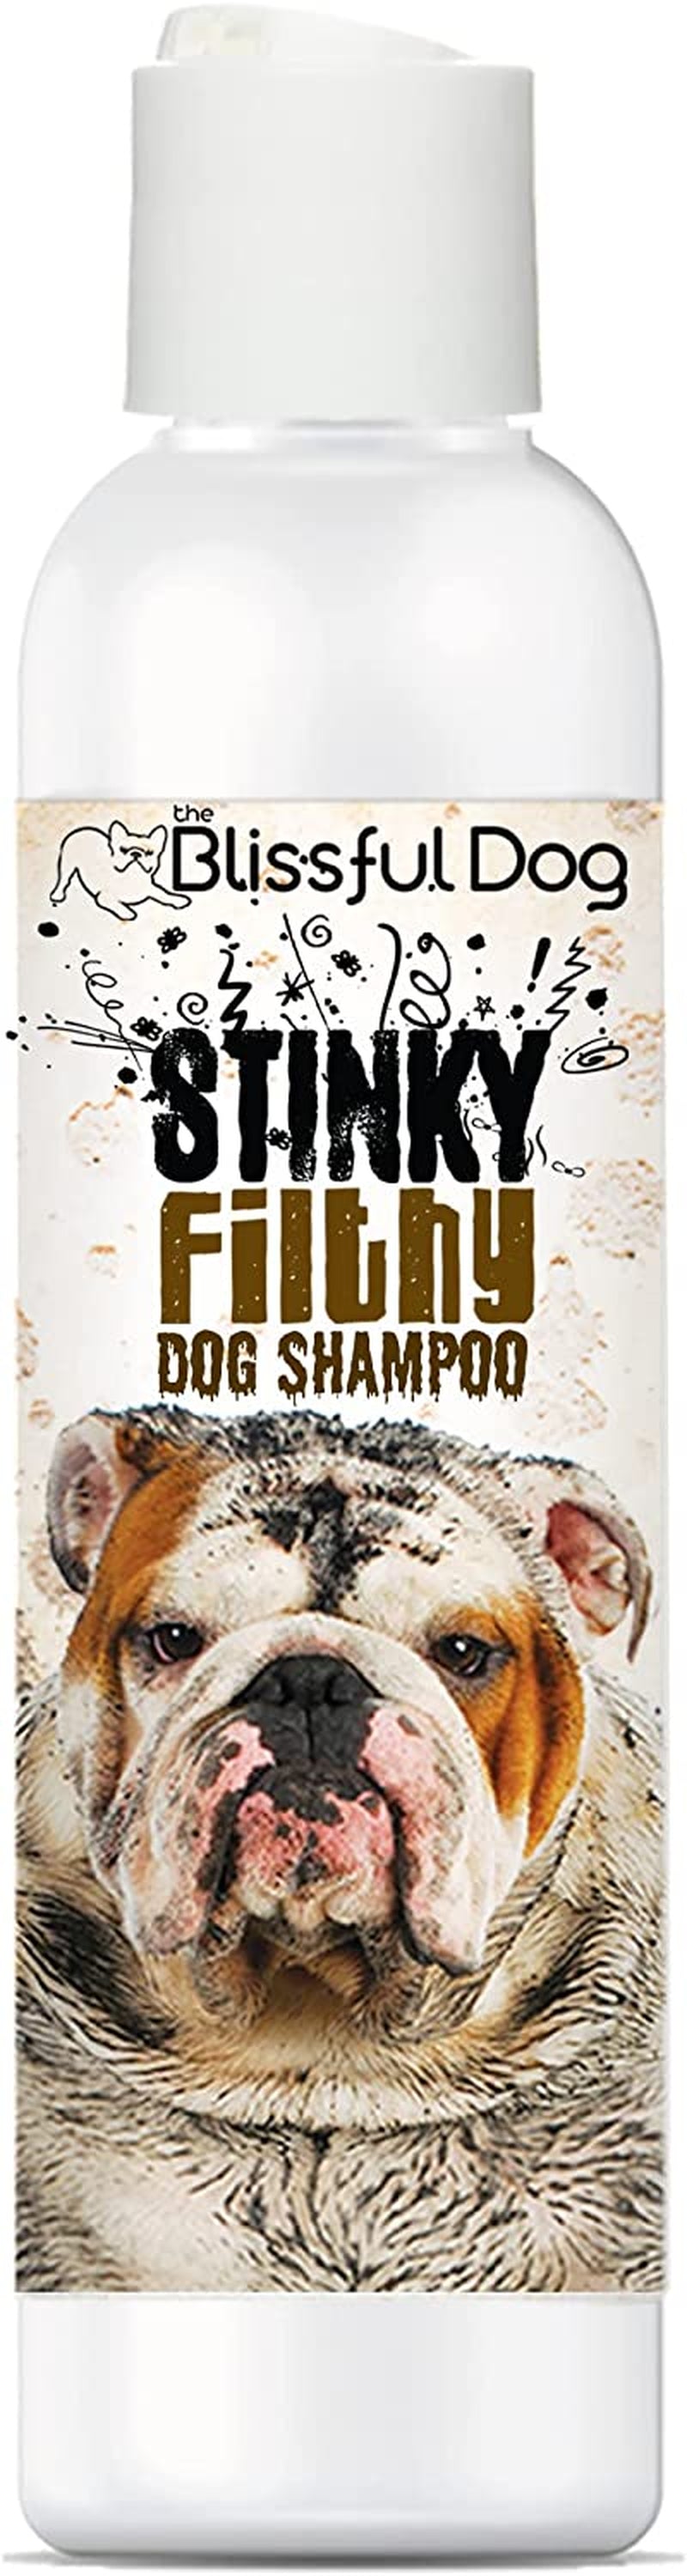 Stinky Filthy Dog Shampoo, 16-Ounce
Deodorizes, deep cleans &amp; shines
Patented odor-neutralizing ingredients cuts "doggy" odor
Adds texture with fabulous sodding, while still easy to rinse
Subtle sStinky Filthy Dog Shampoo, 16-Ounce